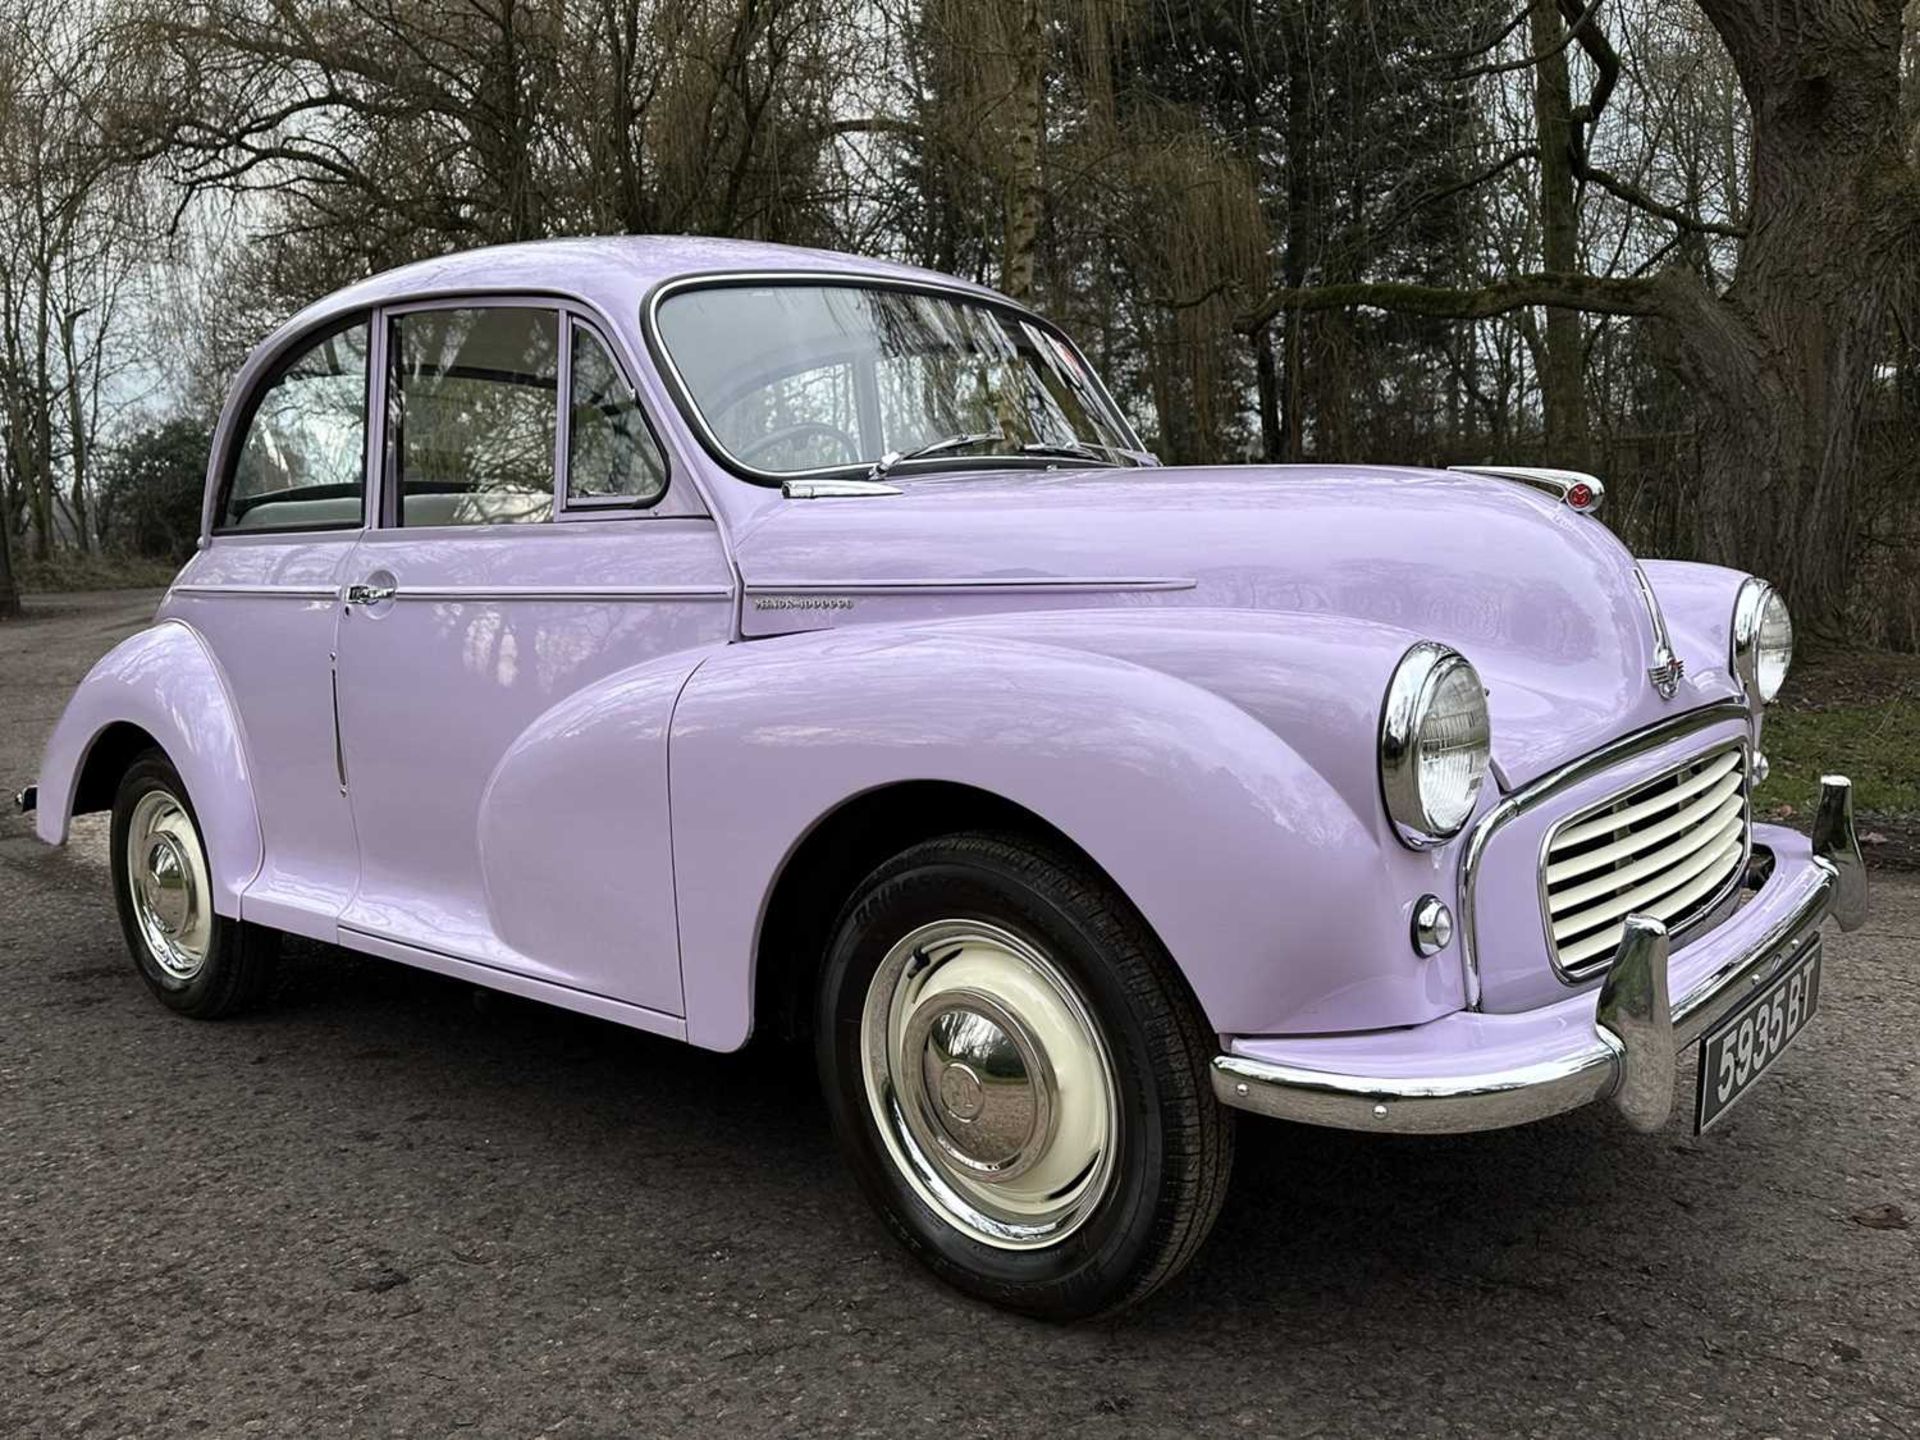 1961 Morris Minor Million 179 of 350 built, fully restored, only three owners from new - Image 8 of 100